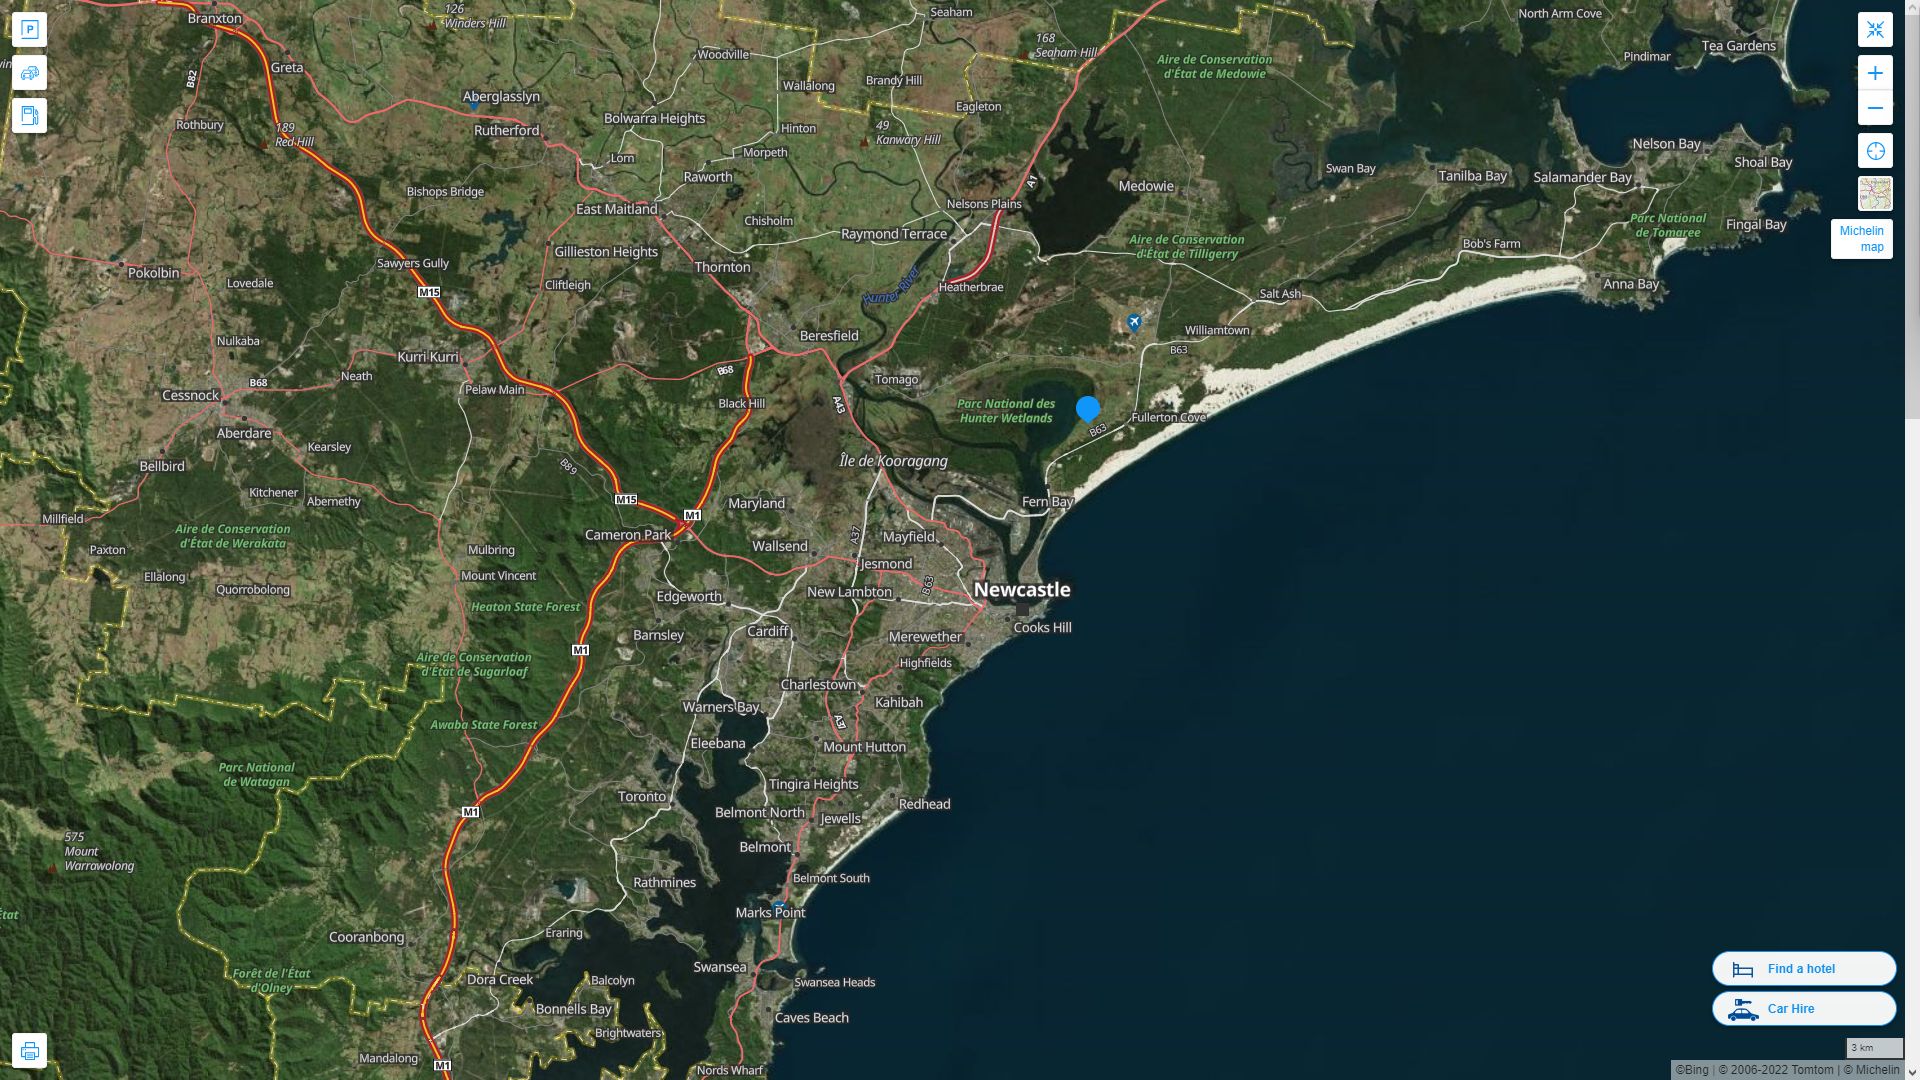 Newcastle Australia Highway and Road Map with Satellite View